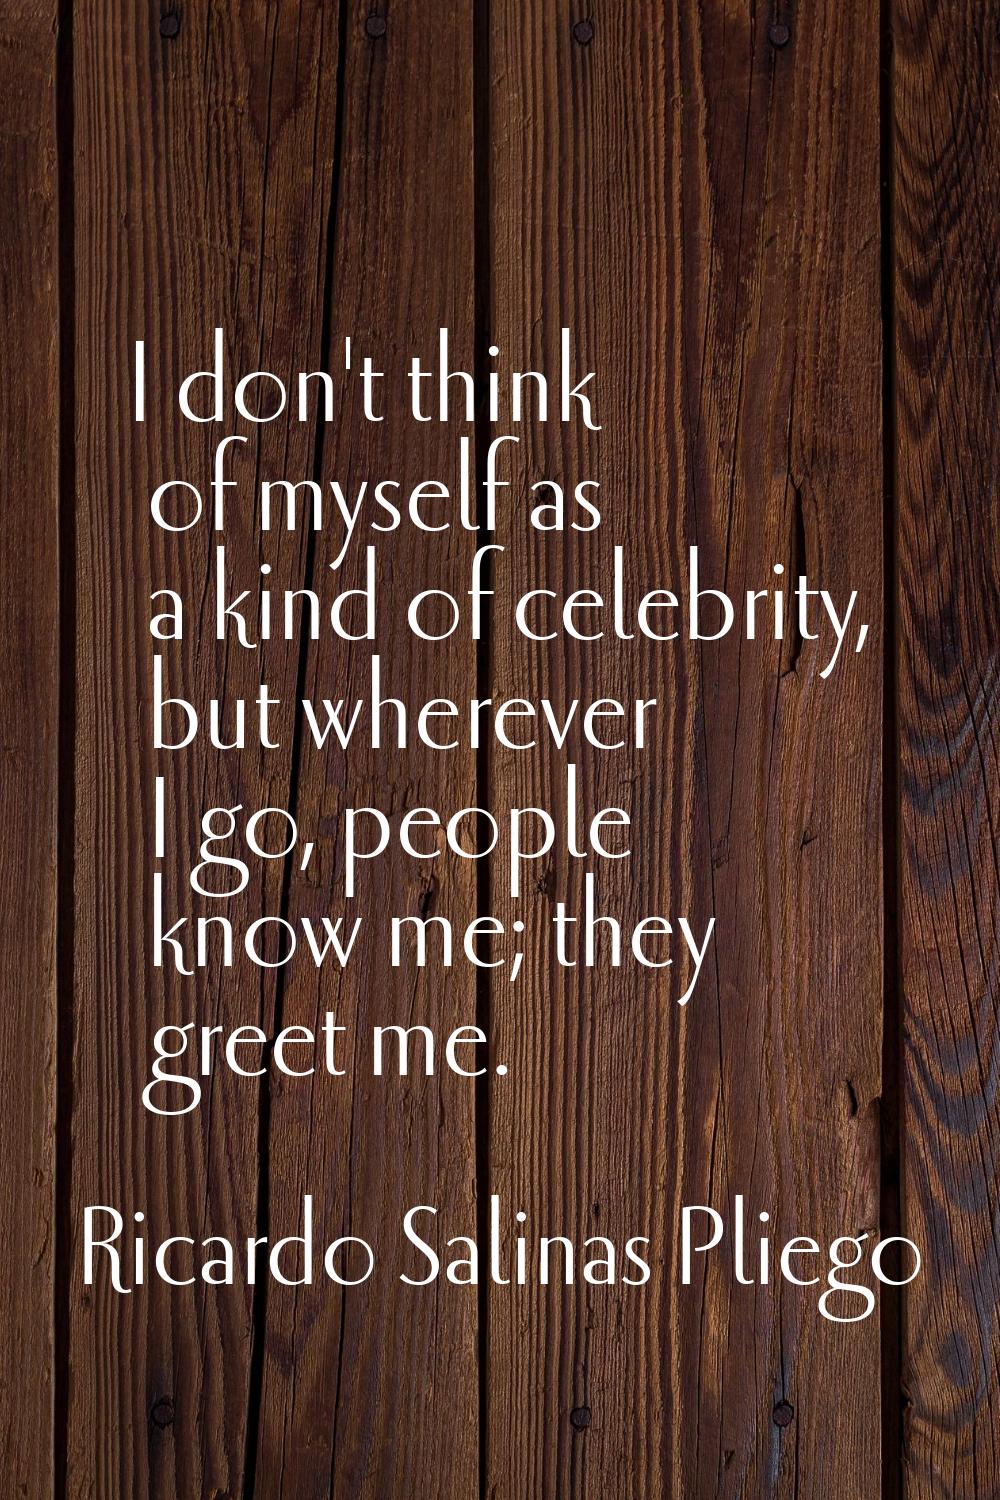 I don't think of myself as a kind of celebrity, but wherever I go, people know me; they greet me.